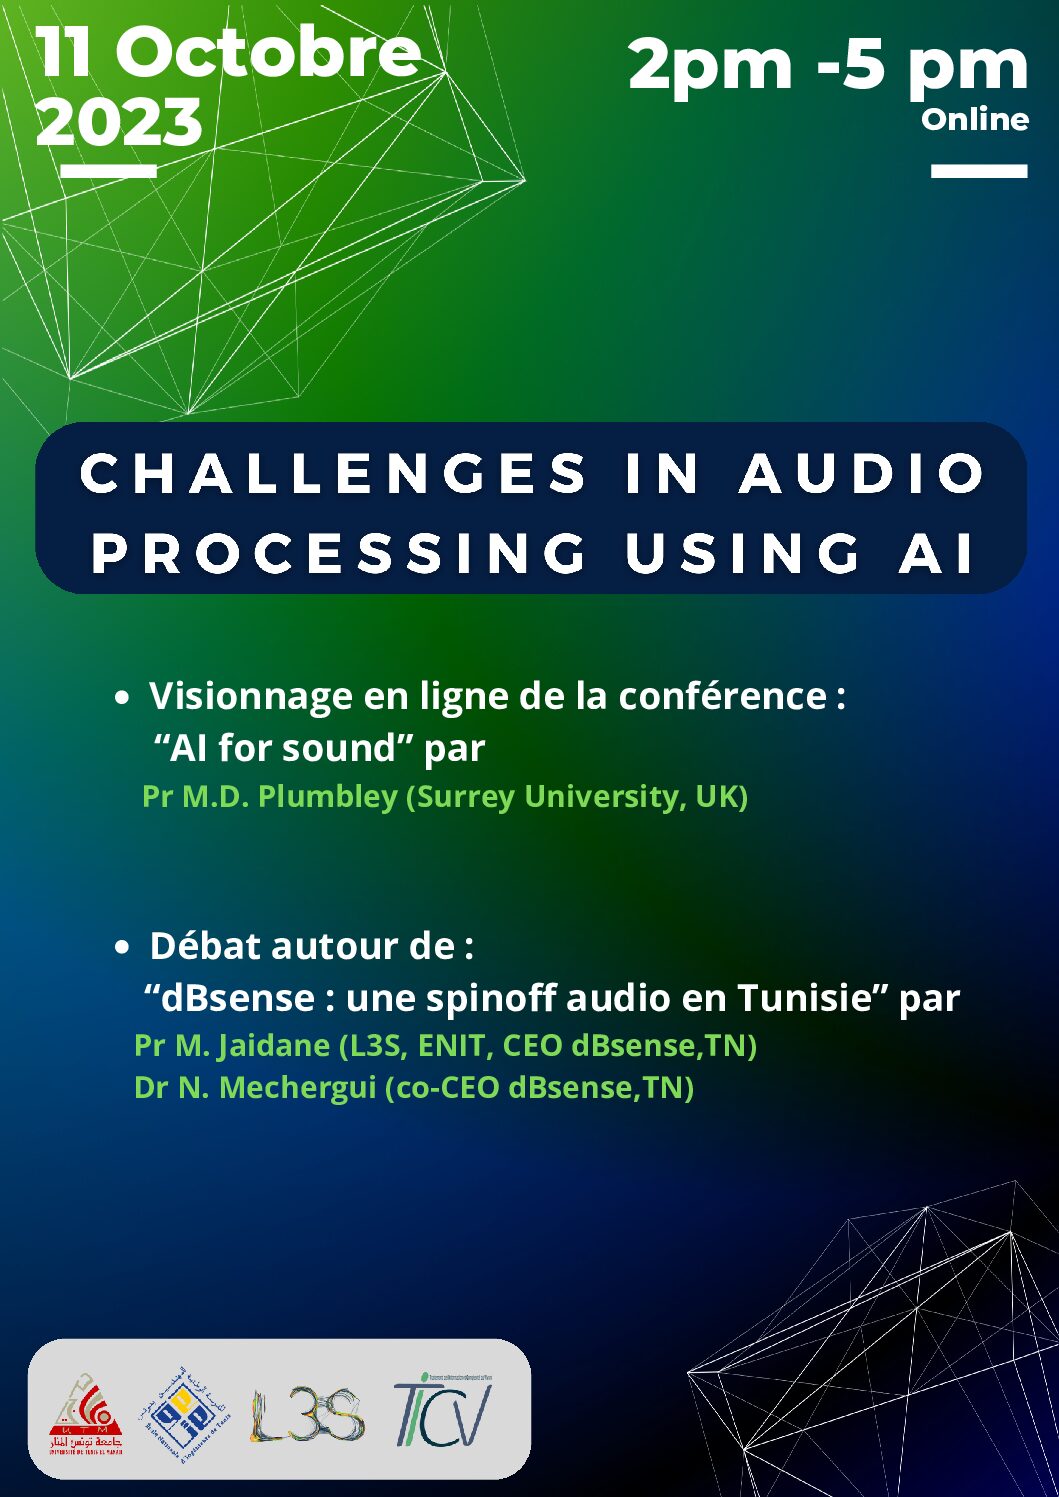 Challenges in audio processing using AI